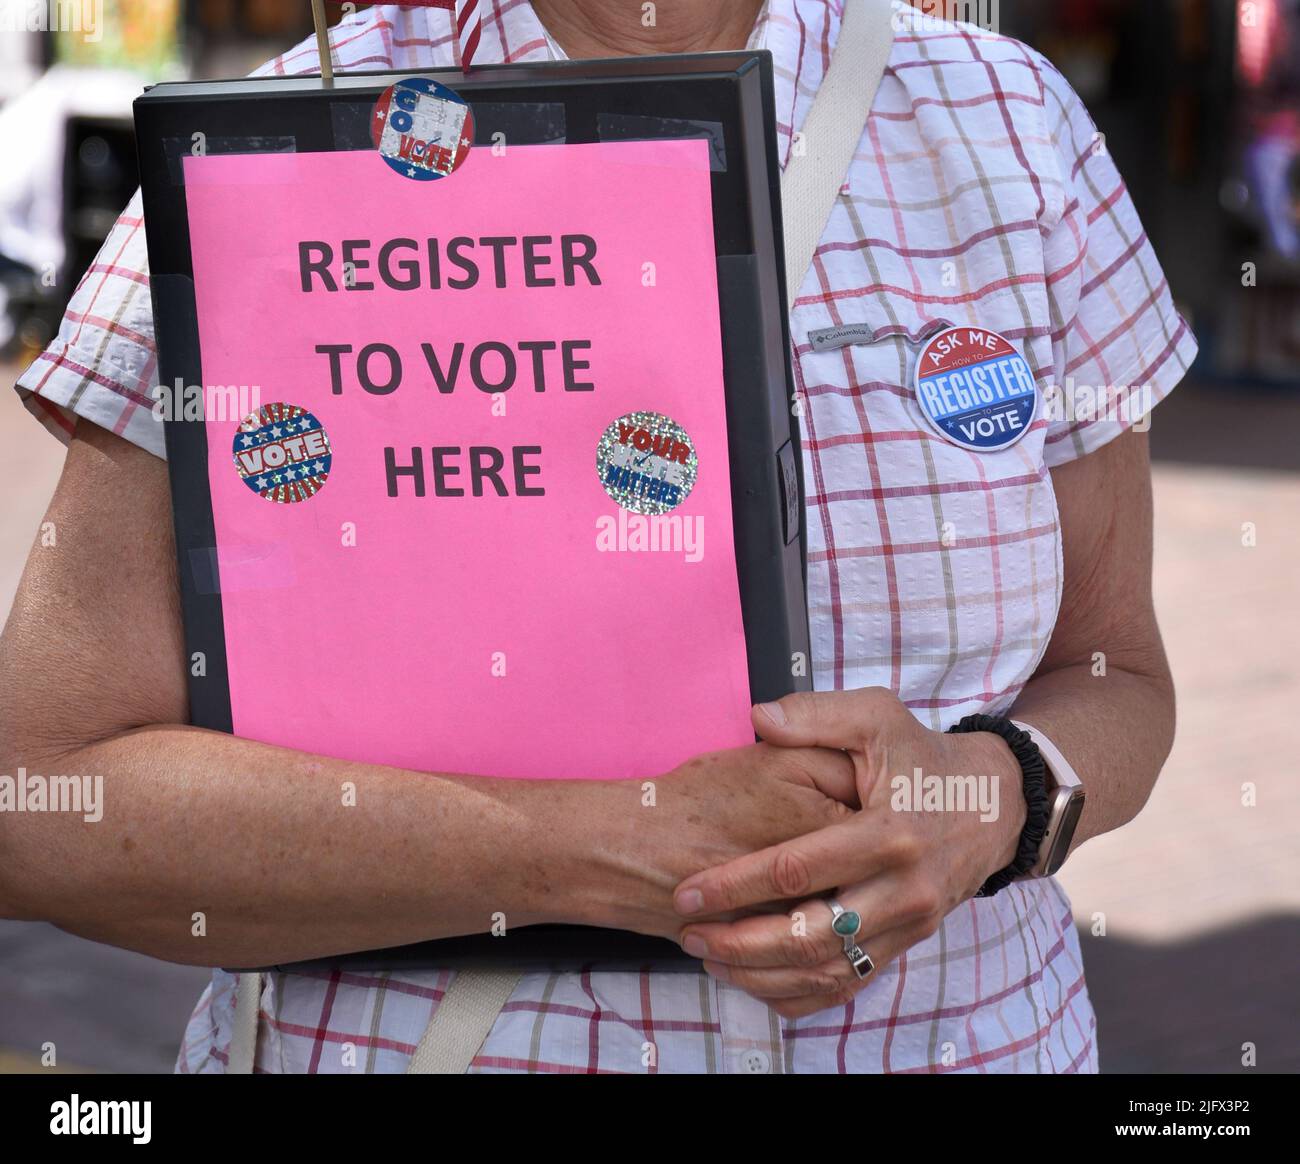 A volunteer at a Fourth of July holiday event in Santa Fe, New Mexico, registers citizens to vote in upcoming U.S. elections. Stock Photo